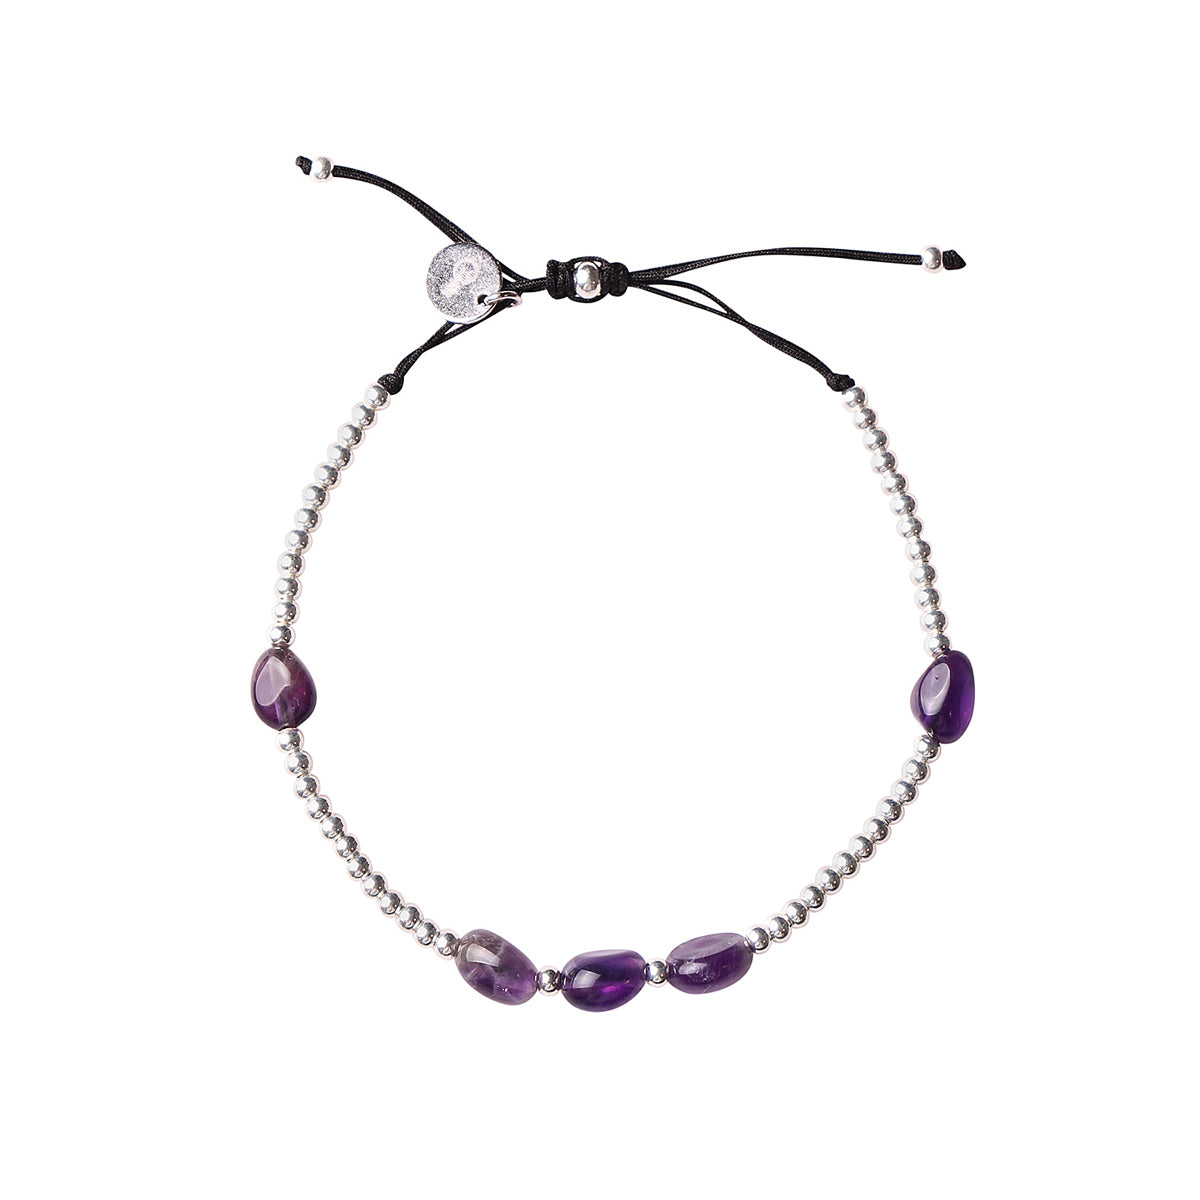 Discover Exquisite 925 Sterling Silver Birthstone Bracelet | Gosia Orlowska